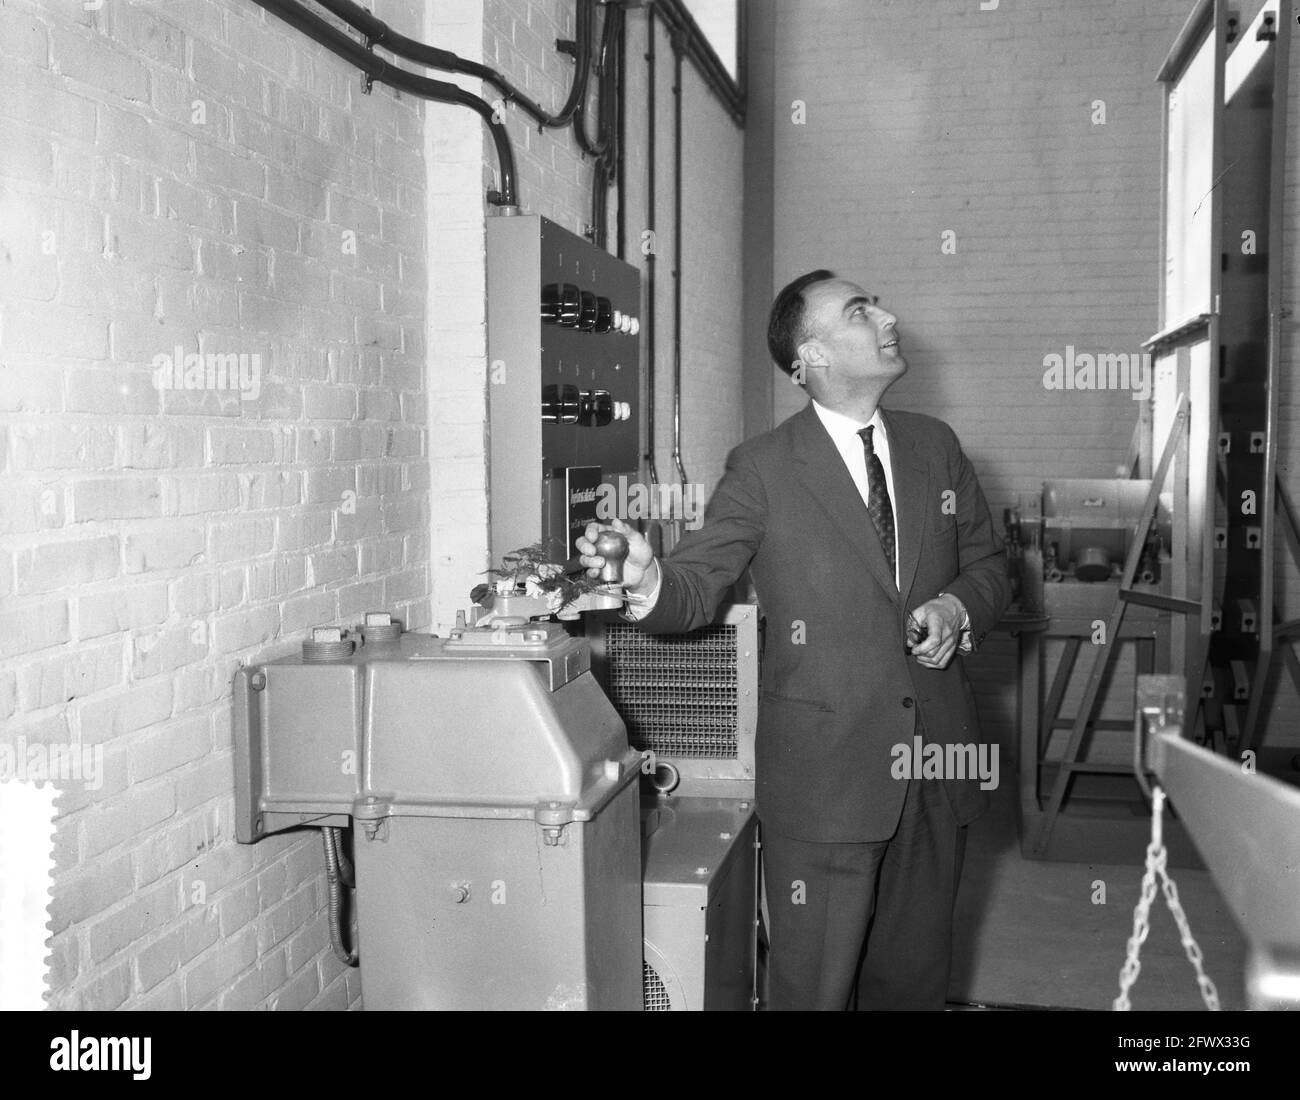 Assignments Machine factory Kiekens at Landsmeer, June 14, 1960, Assignments, The Netherlands, 20th century press agency photo, news to remember, documentary, historic photography 1945-1990, visual stories, human history of the Twentieth Century, capturing moments in time Stock Photo